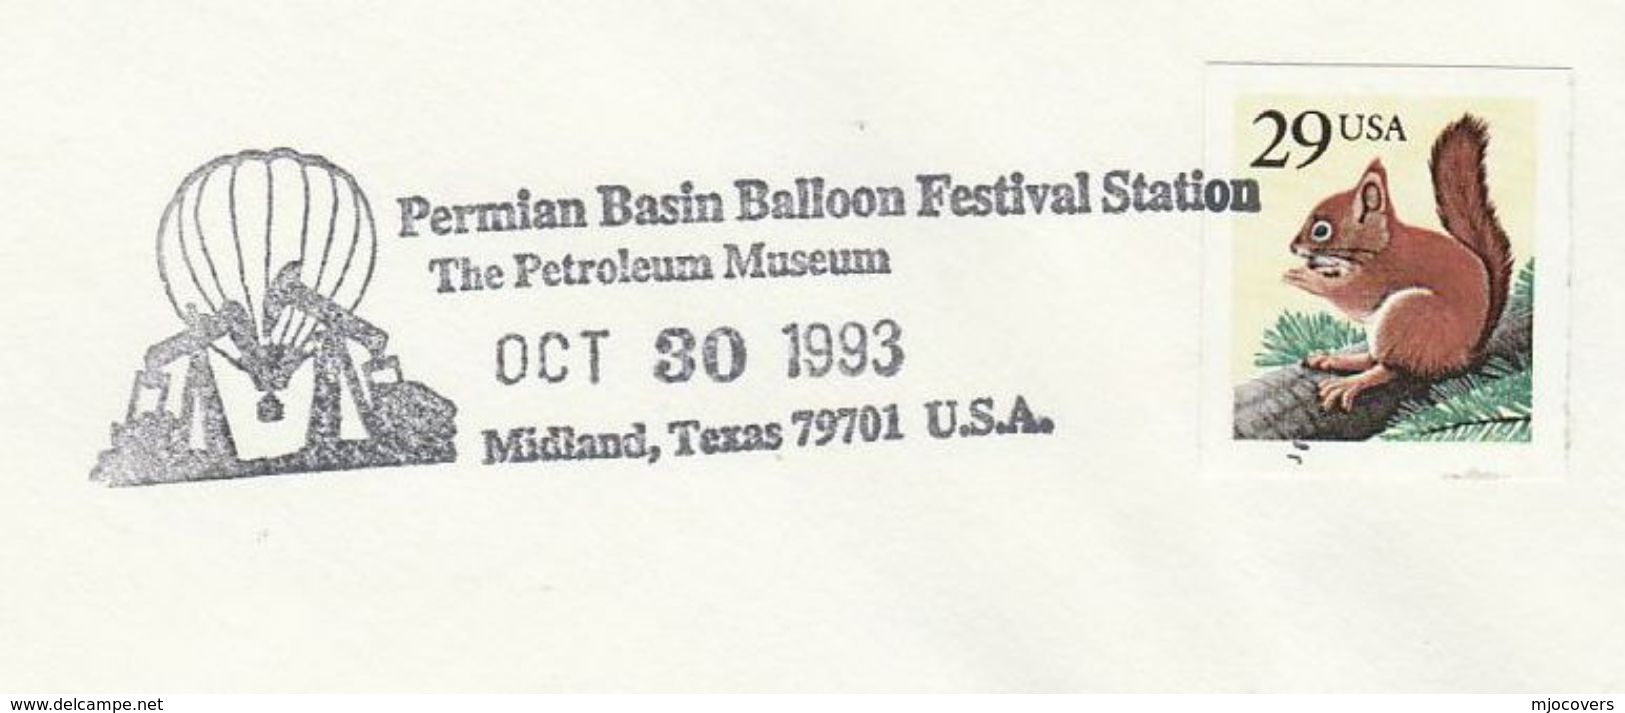 1993 Texas PETROLEUM  MUSEUM BALLOON FESTIVAL Illus OIL DRILL & BALLOON EVENT Cover USA Stamp Ballooning  Energy - Oil